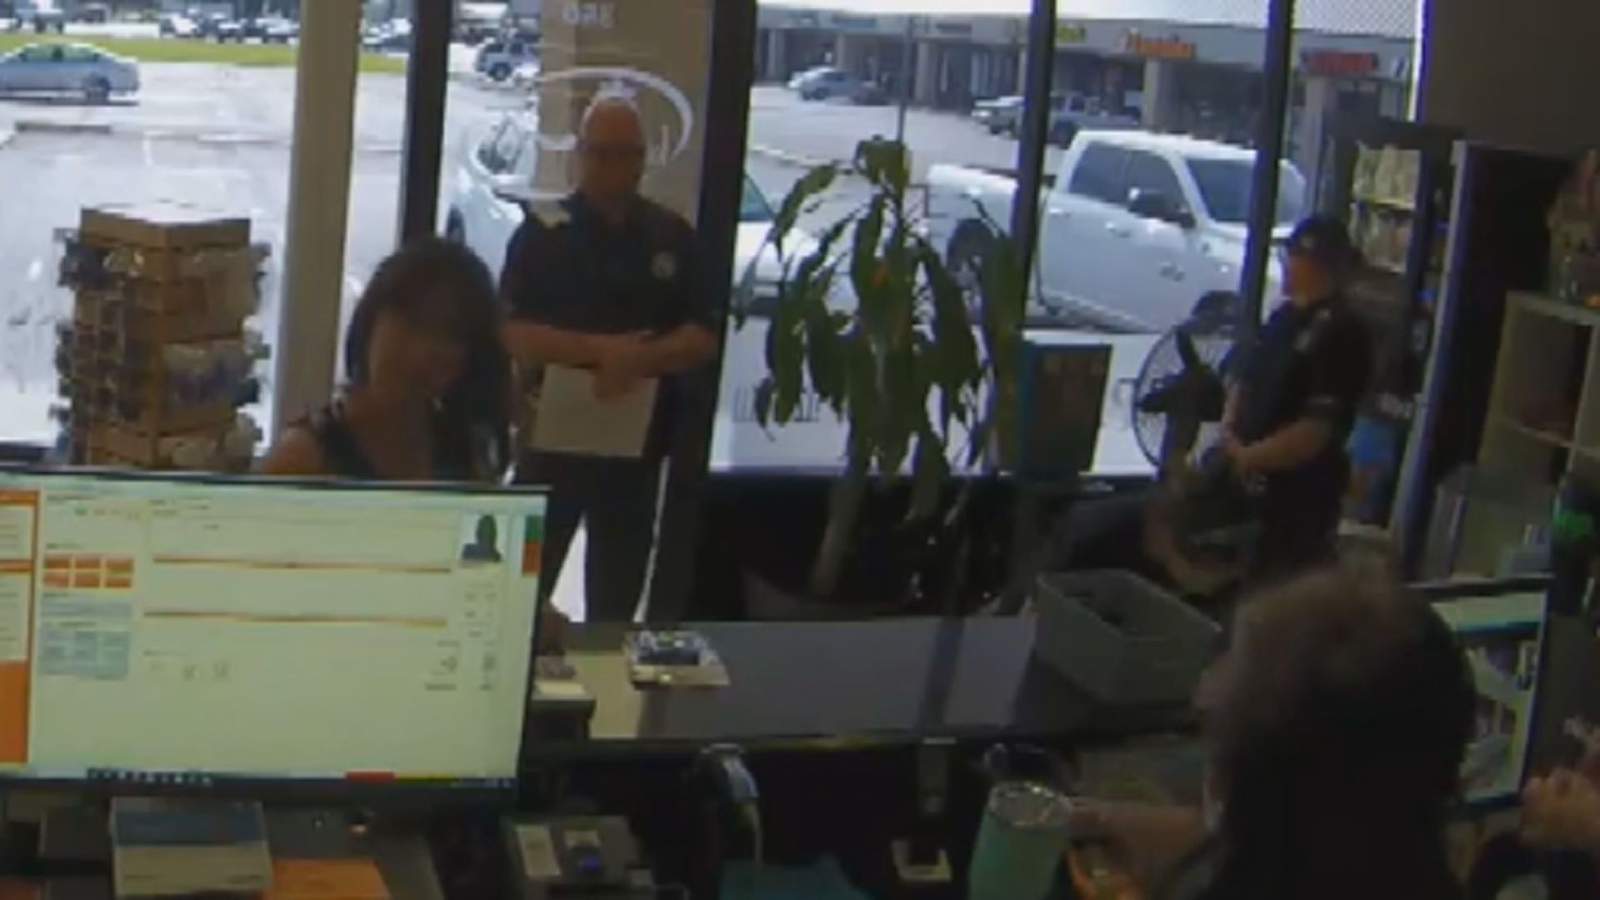 Video: 2 Harris County fire marshal inspectors shut down tanning salon while violating ‘mask order’